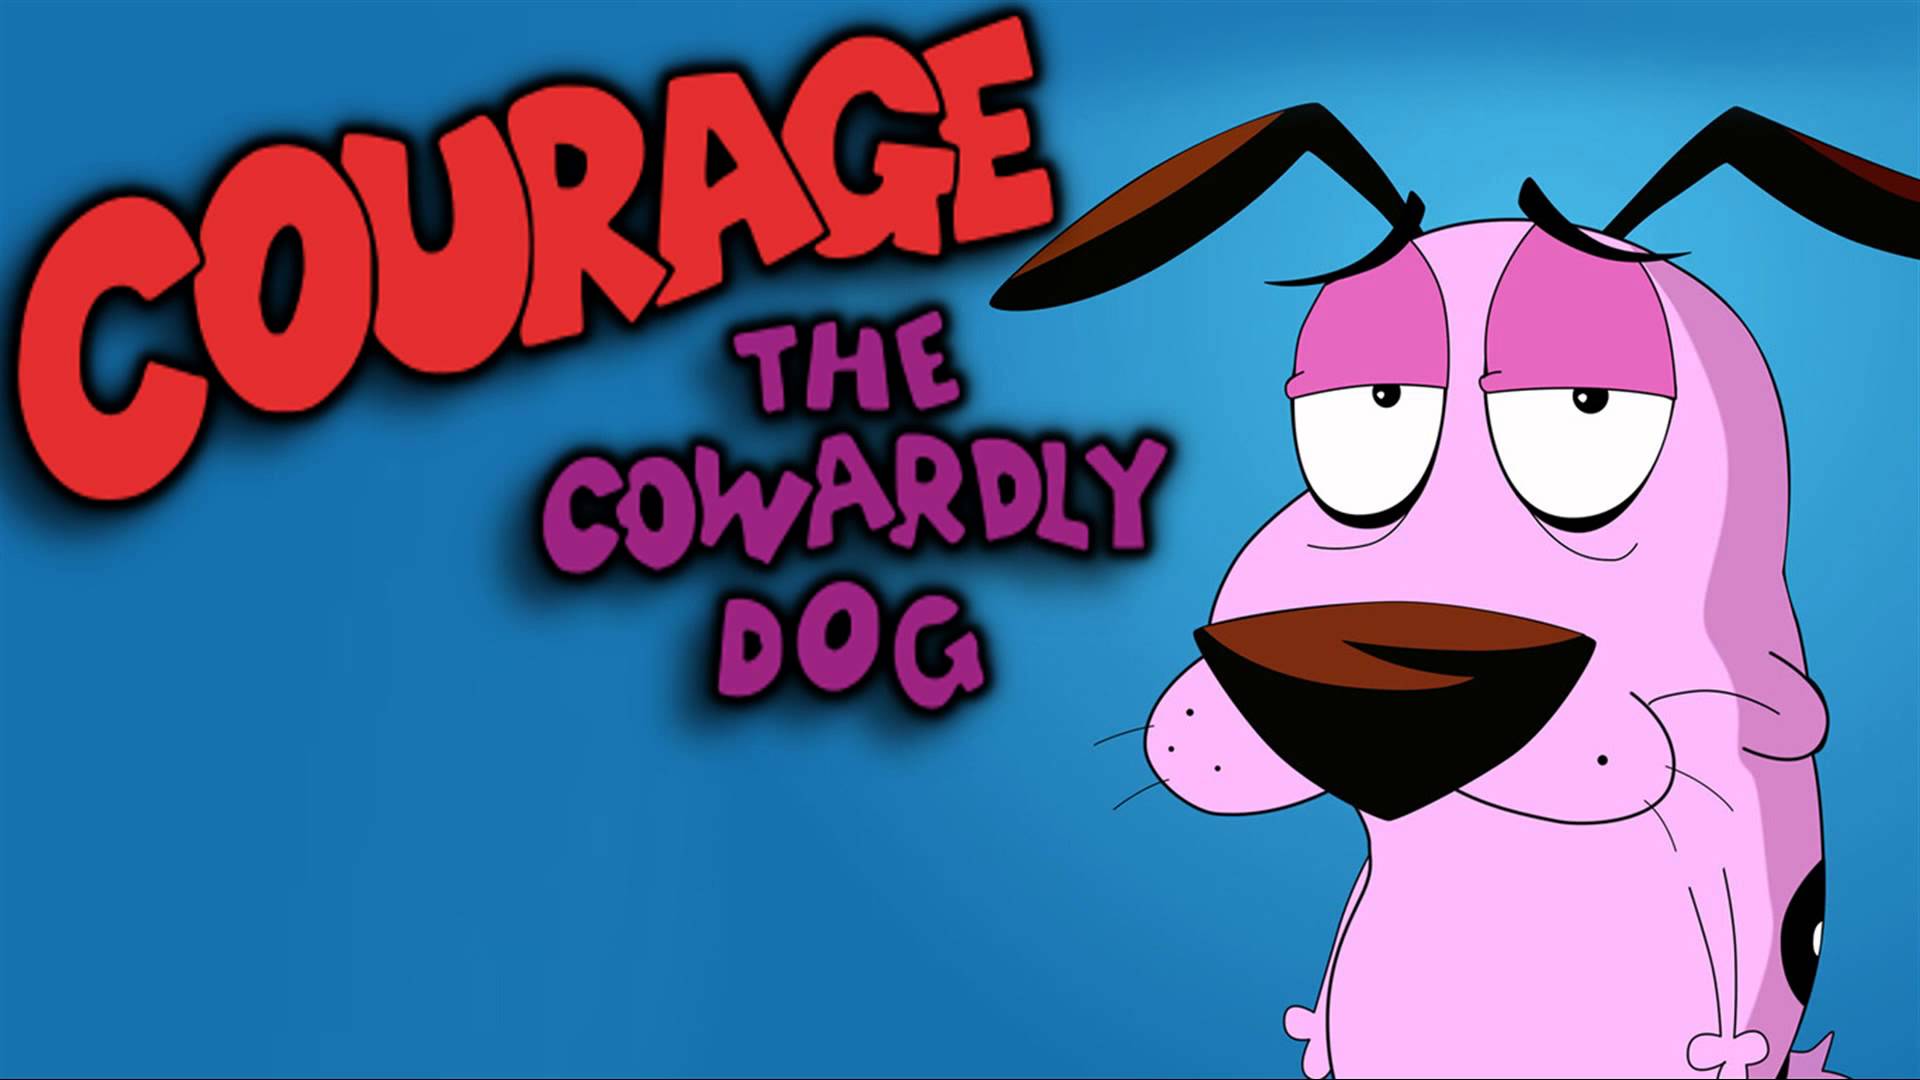 Courage the Cowardly Dog This Show is Still Popular + Wallpaper